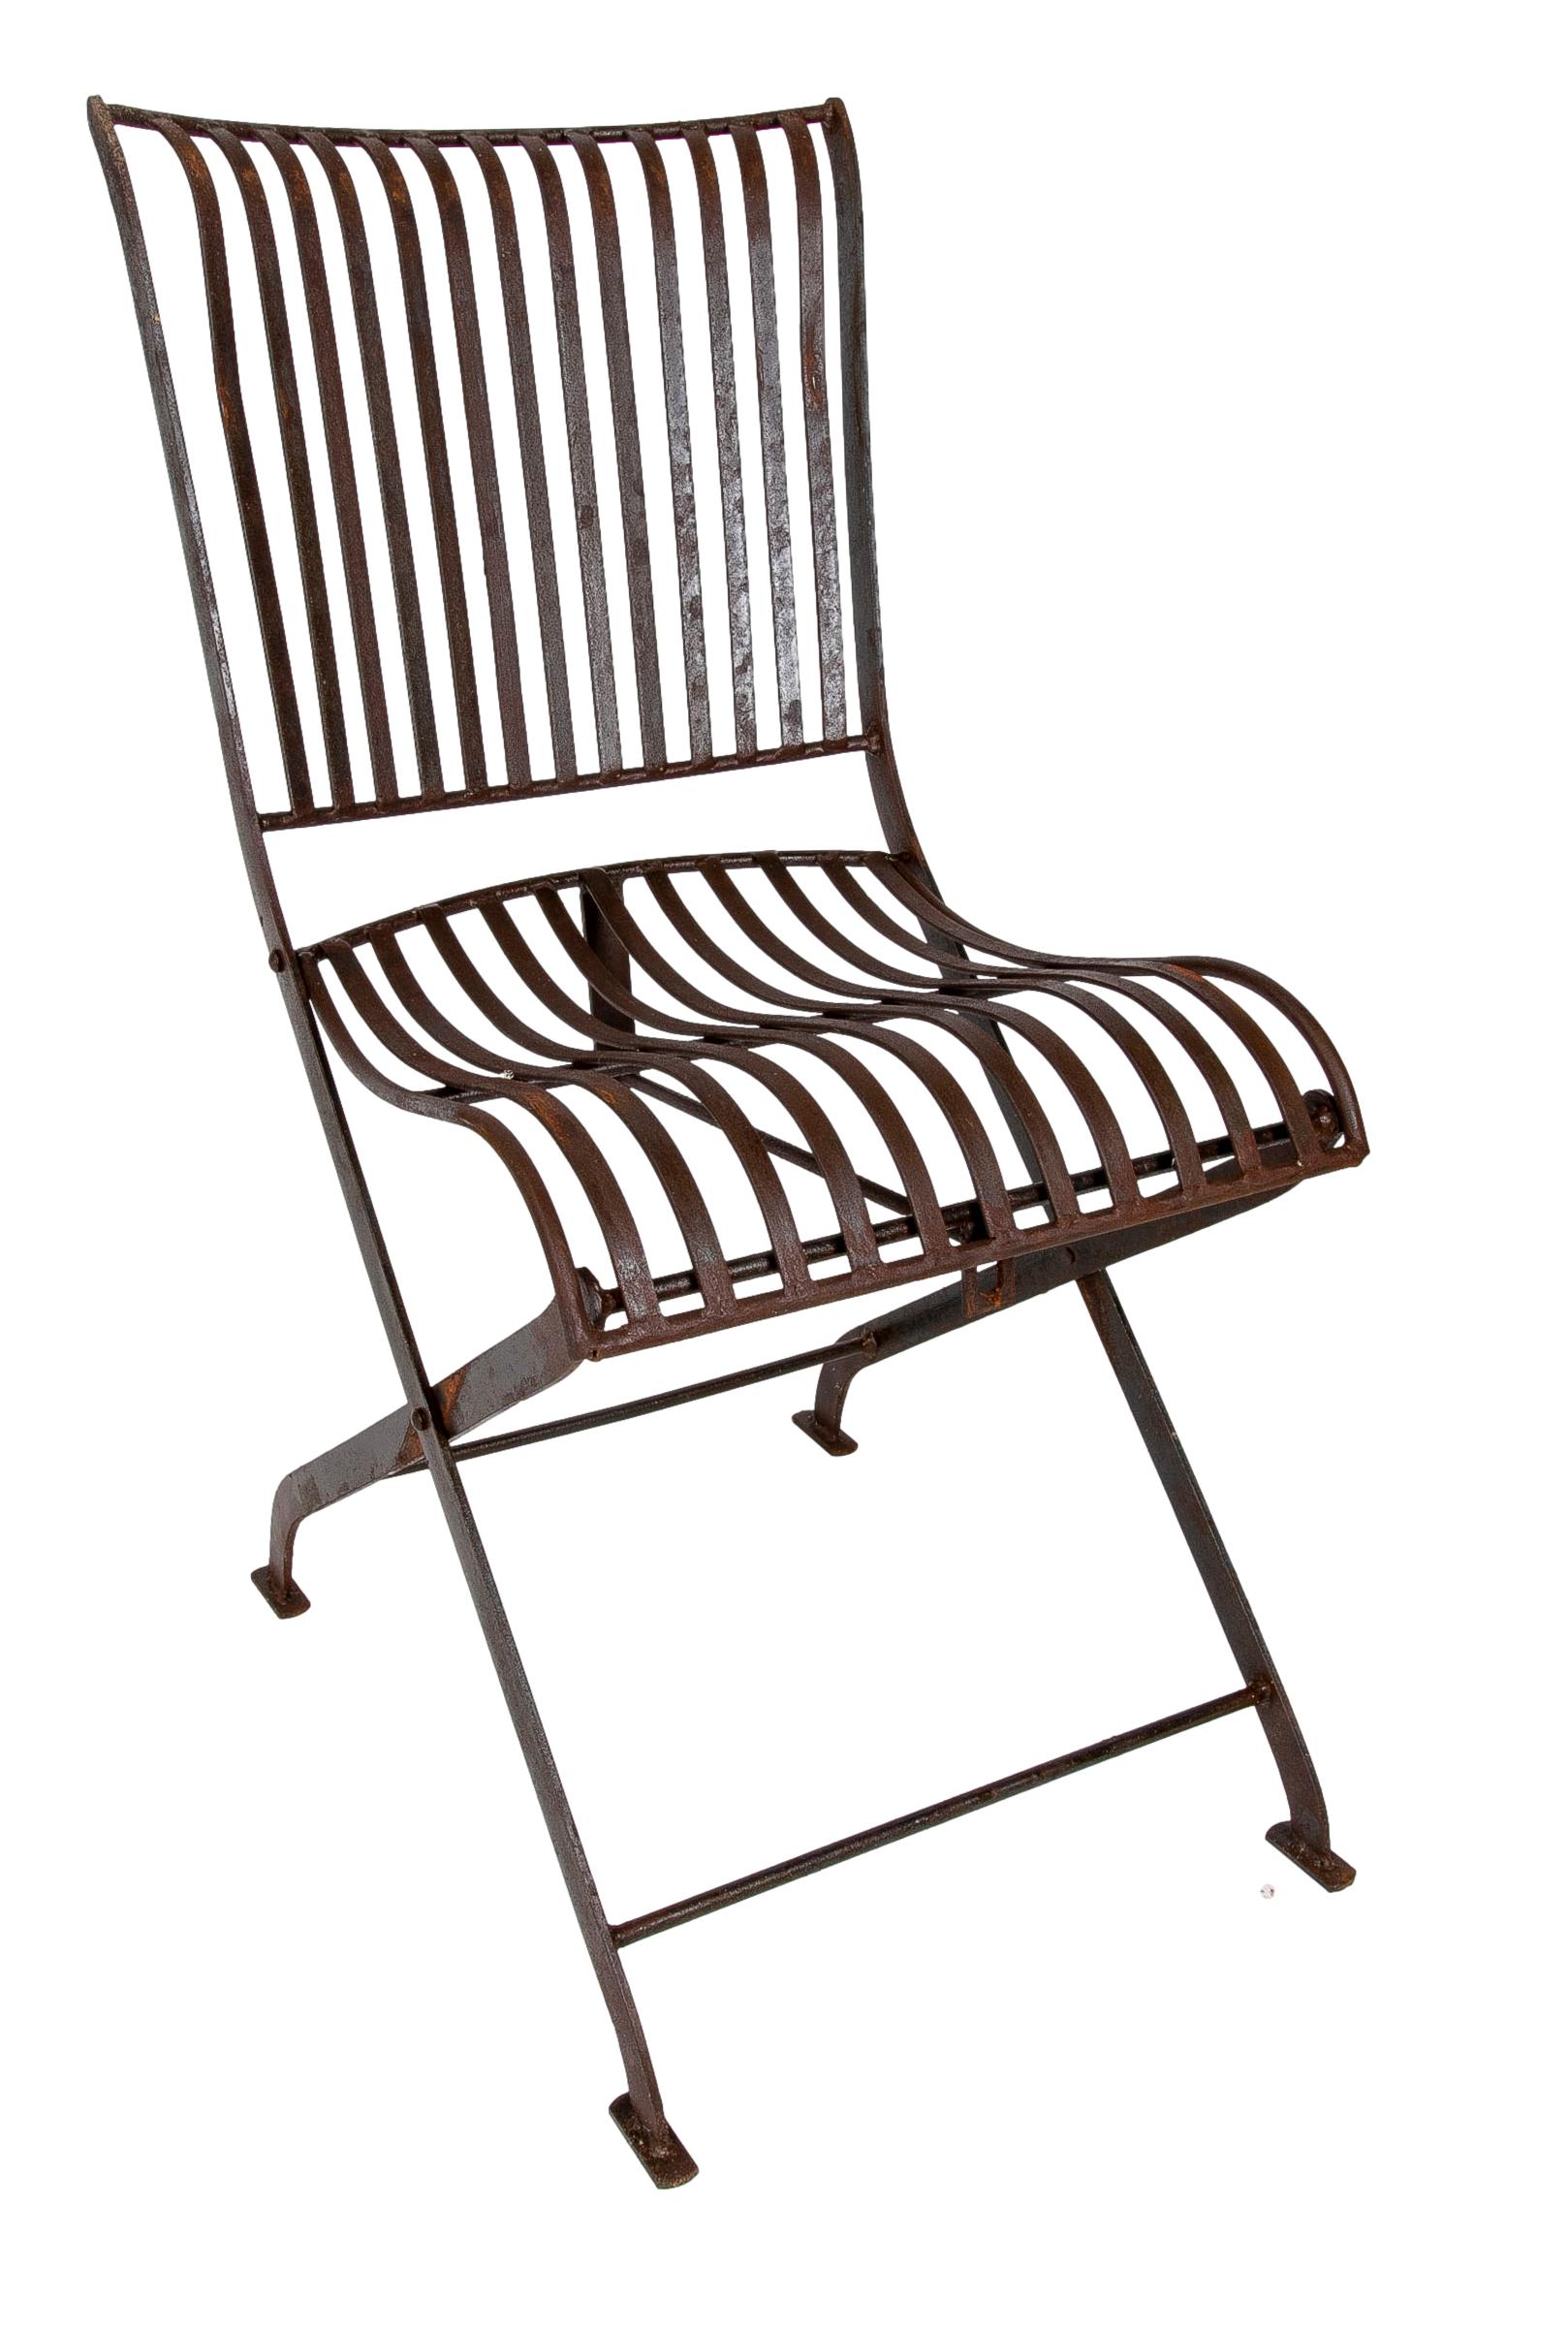 French Pair of Foldable Iron Garden Chairs For Sale